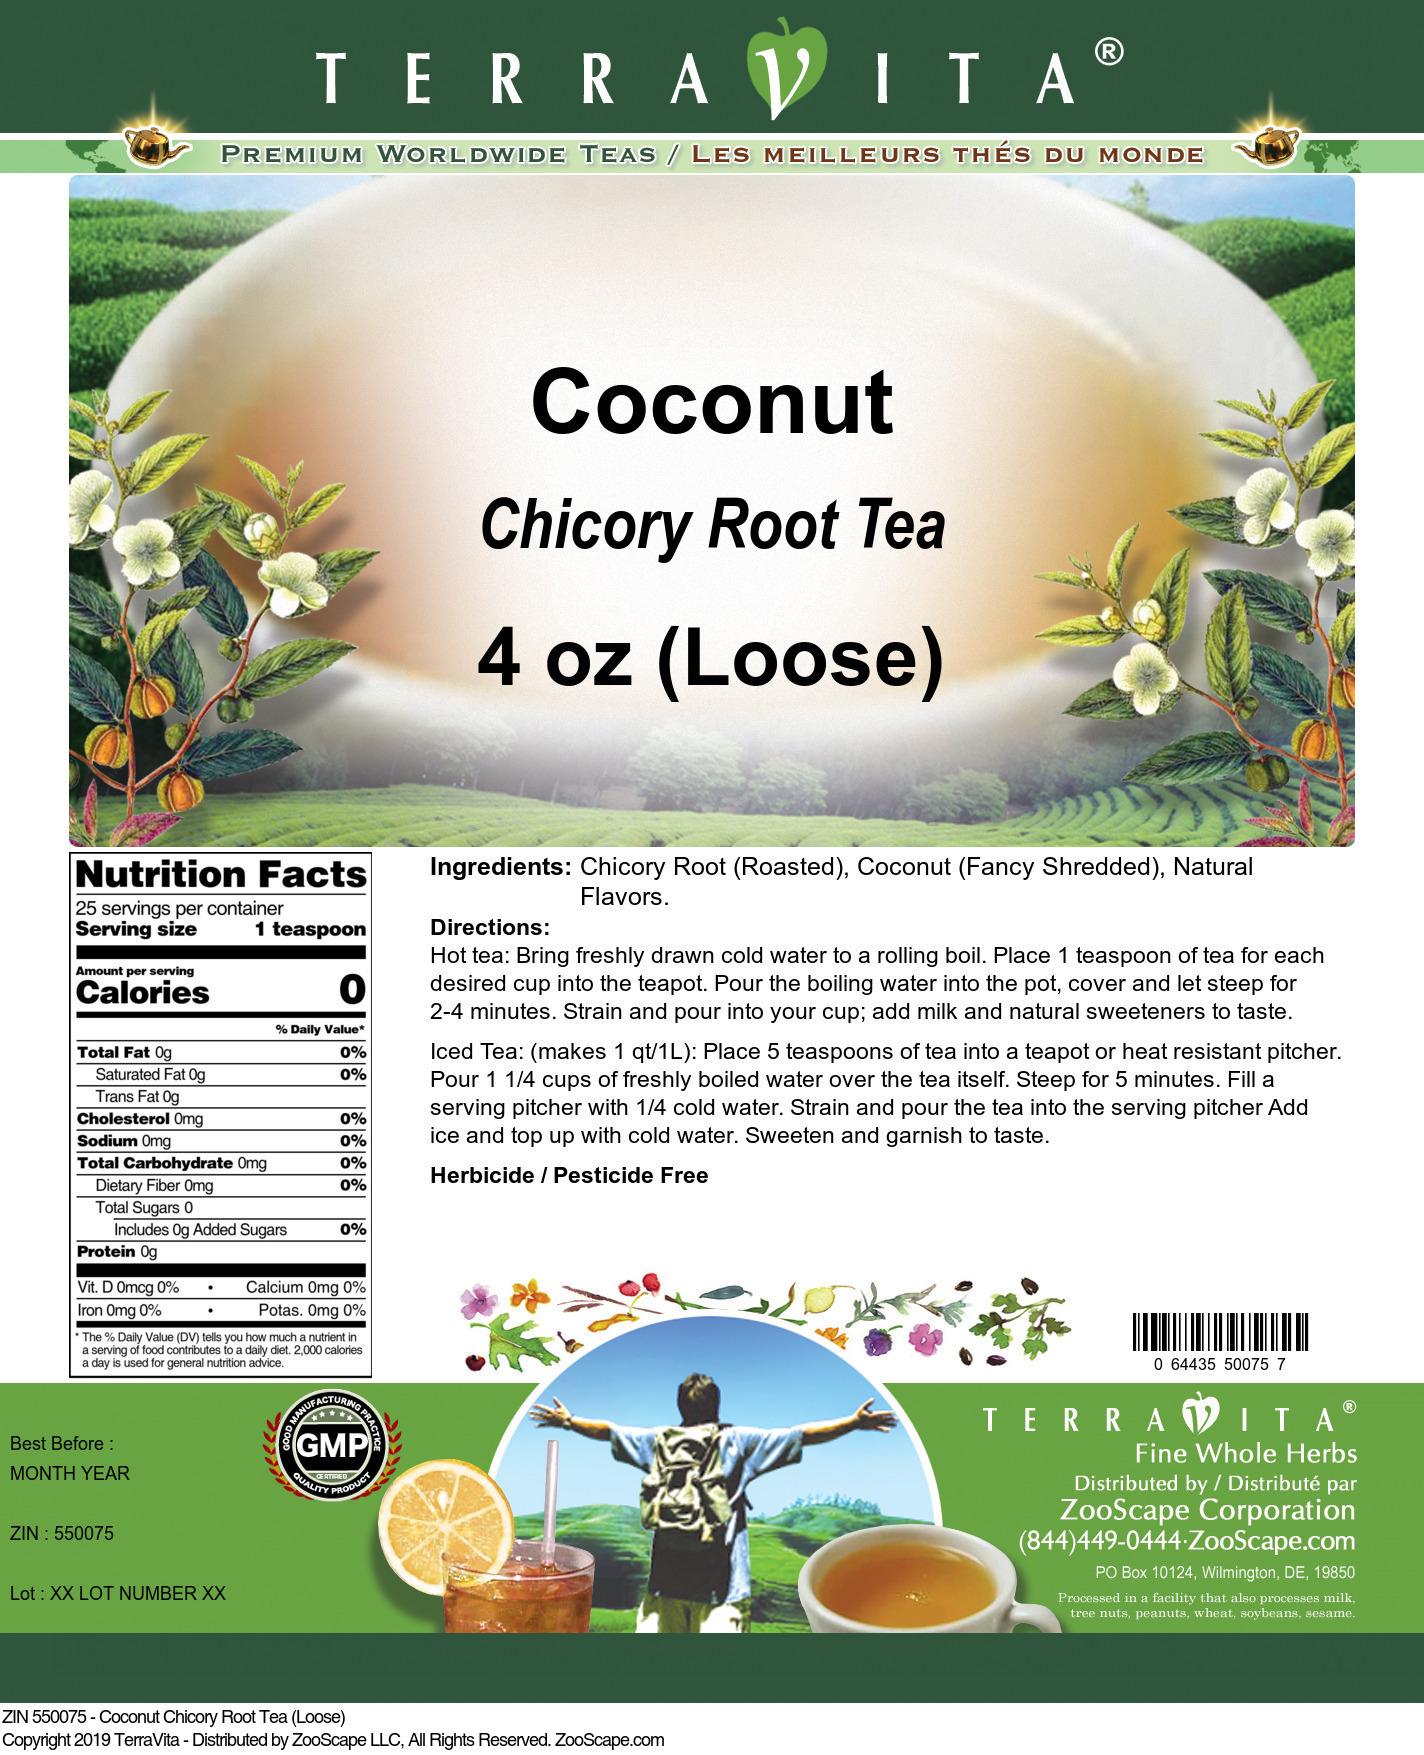 Coconut Chicory Root Tea (Loose) - Label